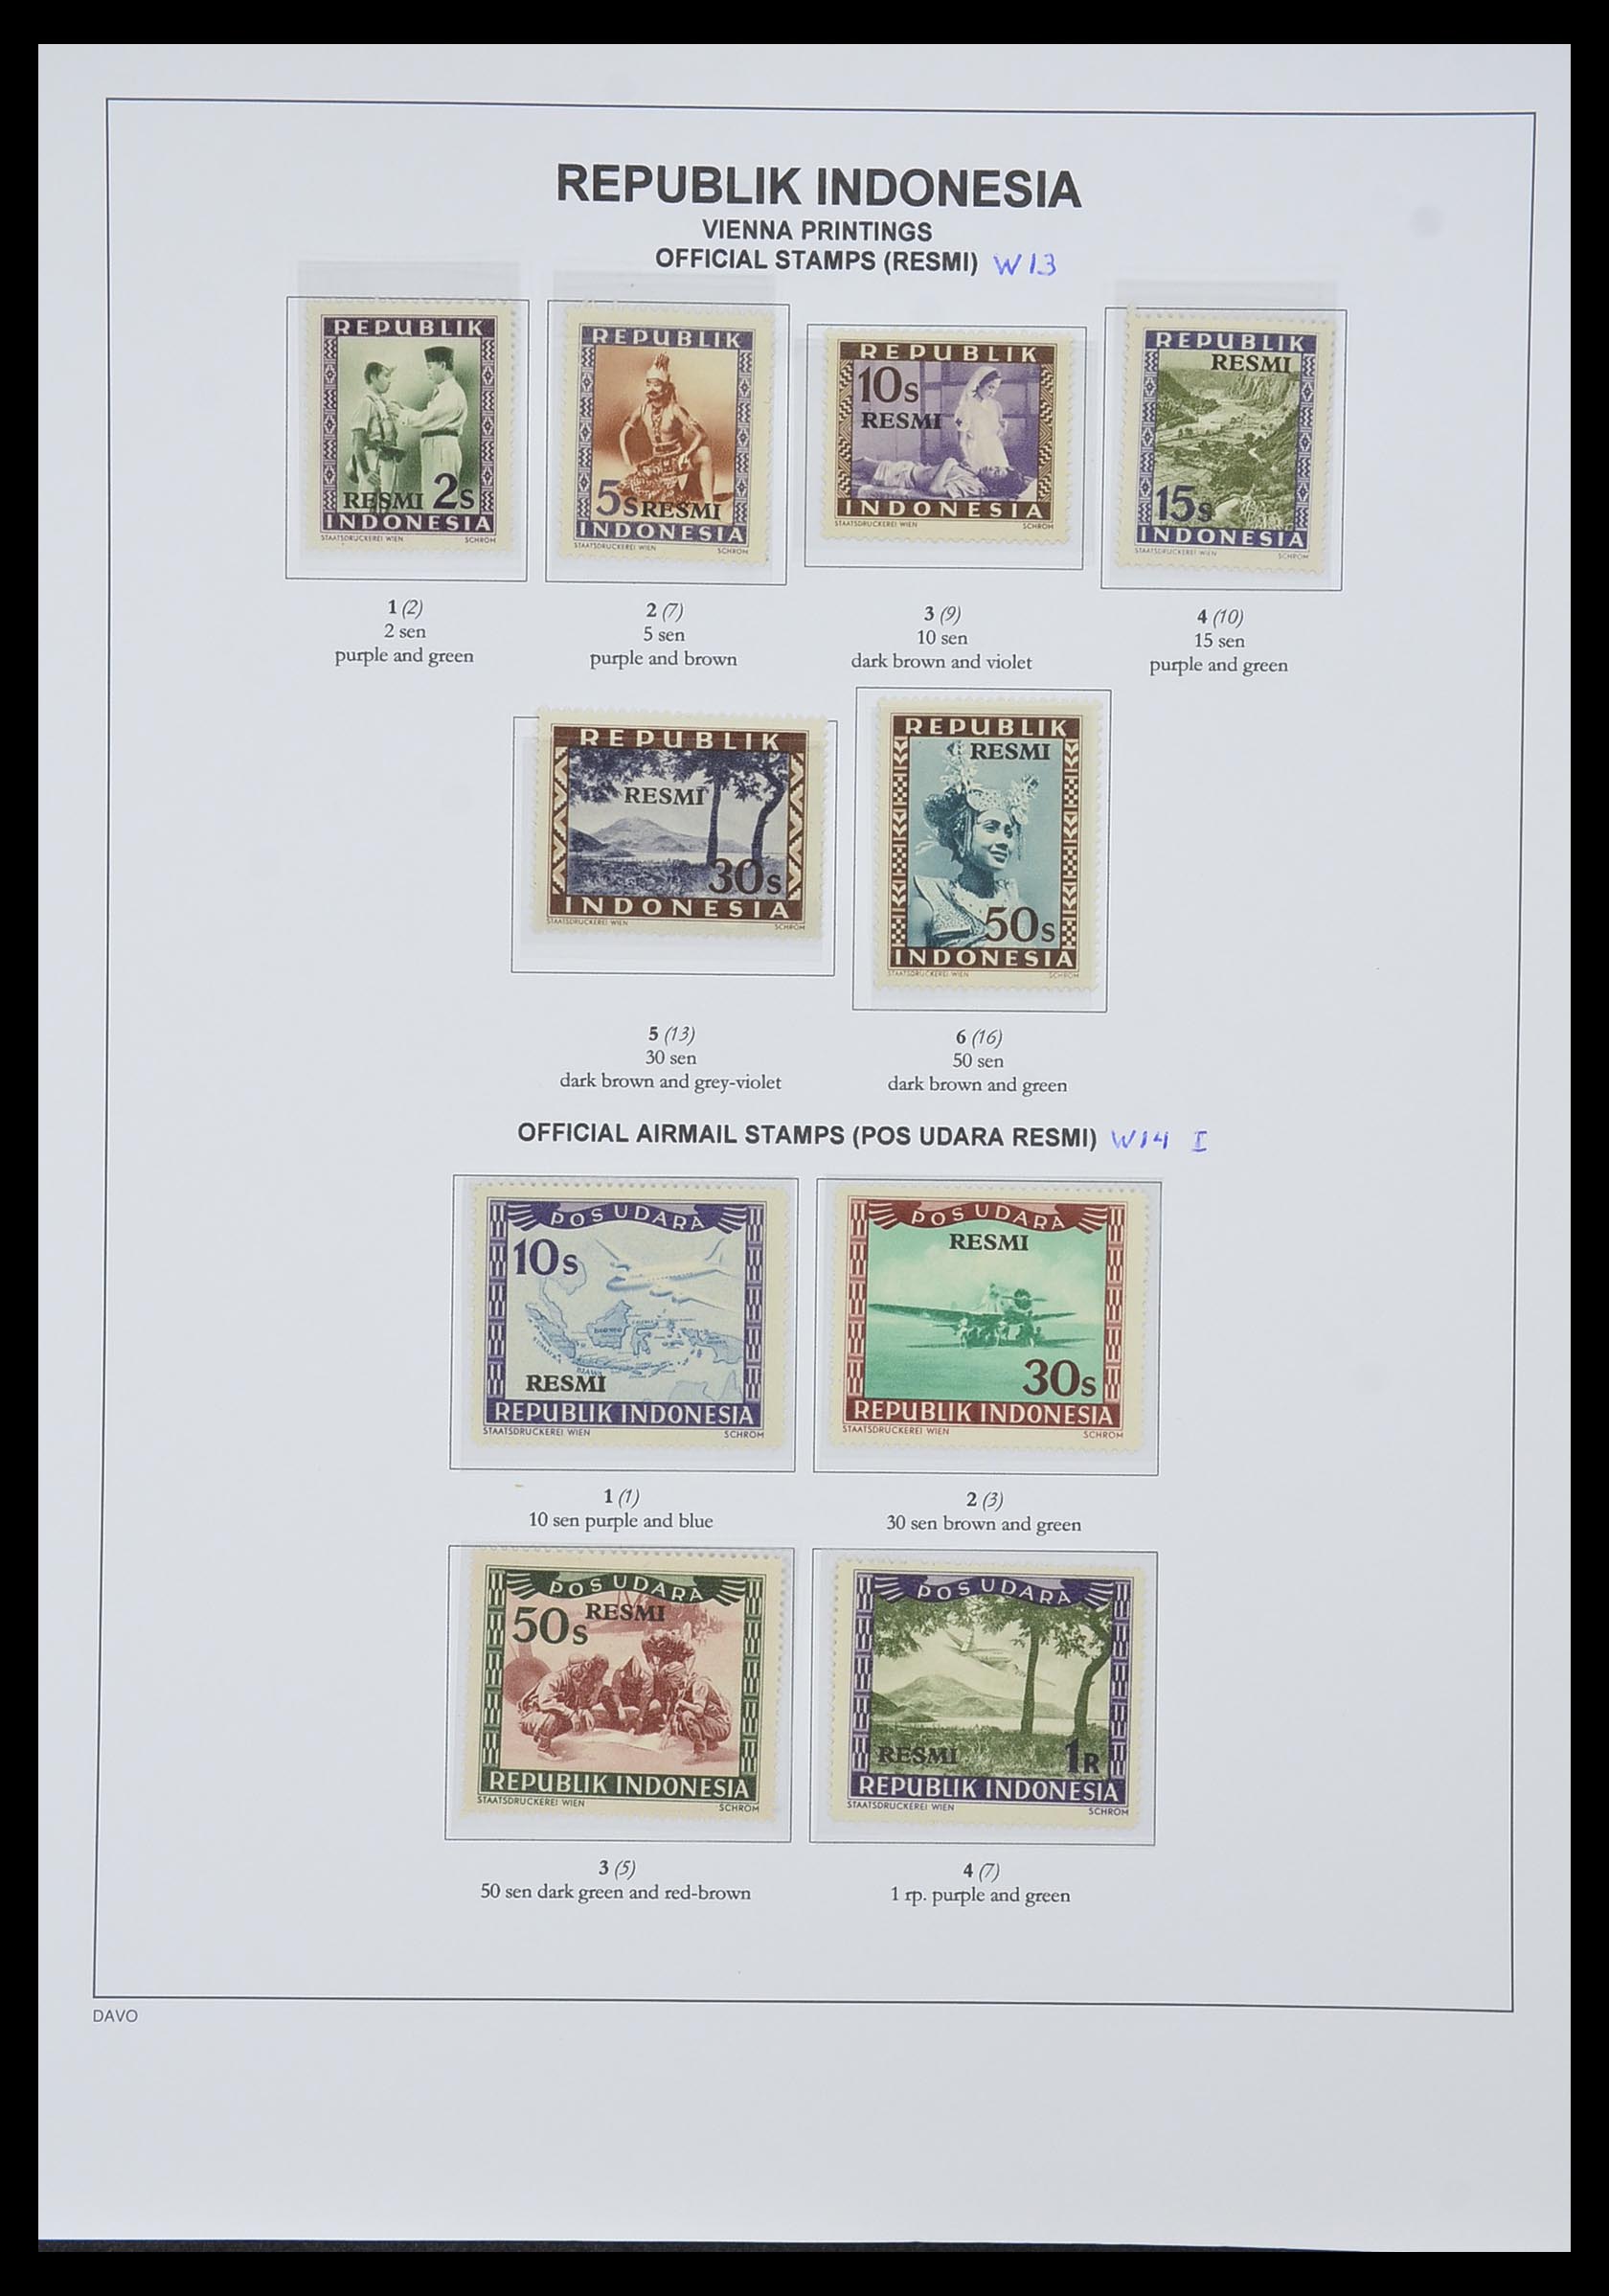 33988 023 - Stamp collection 33988 Vienna printings Indonesia.